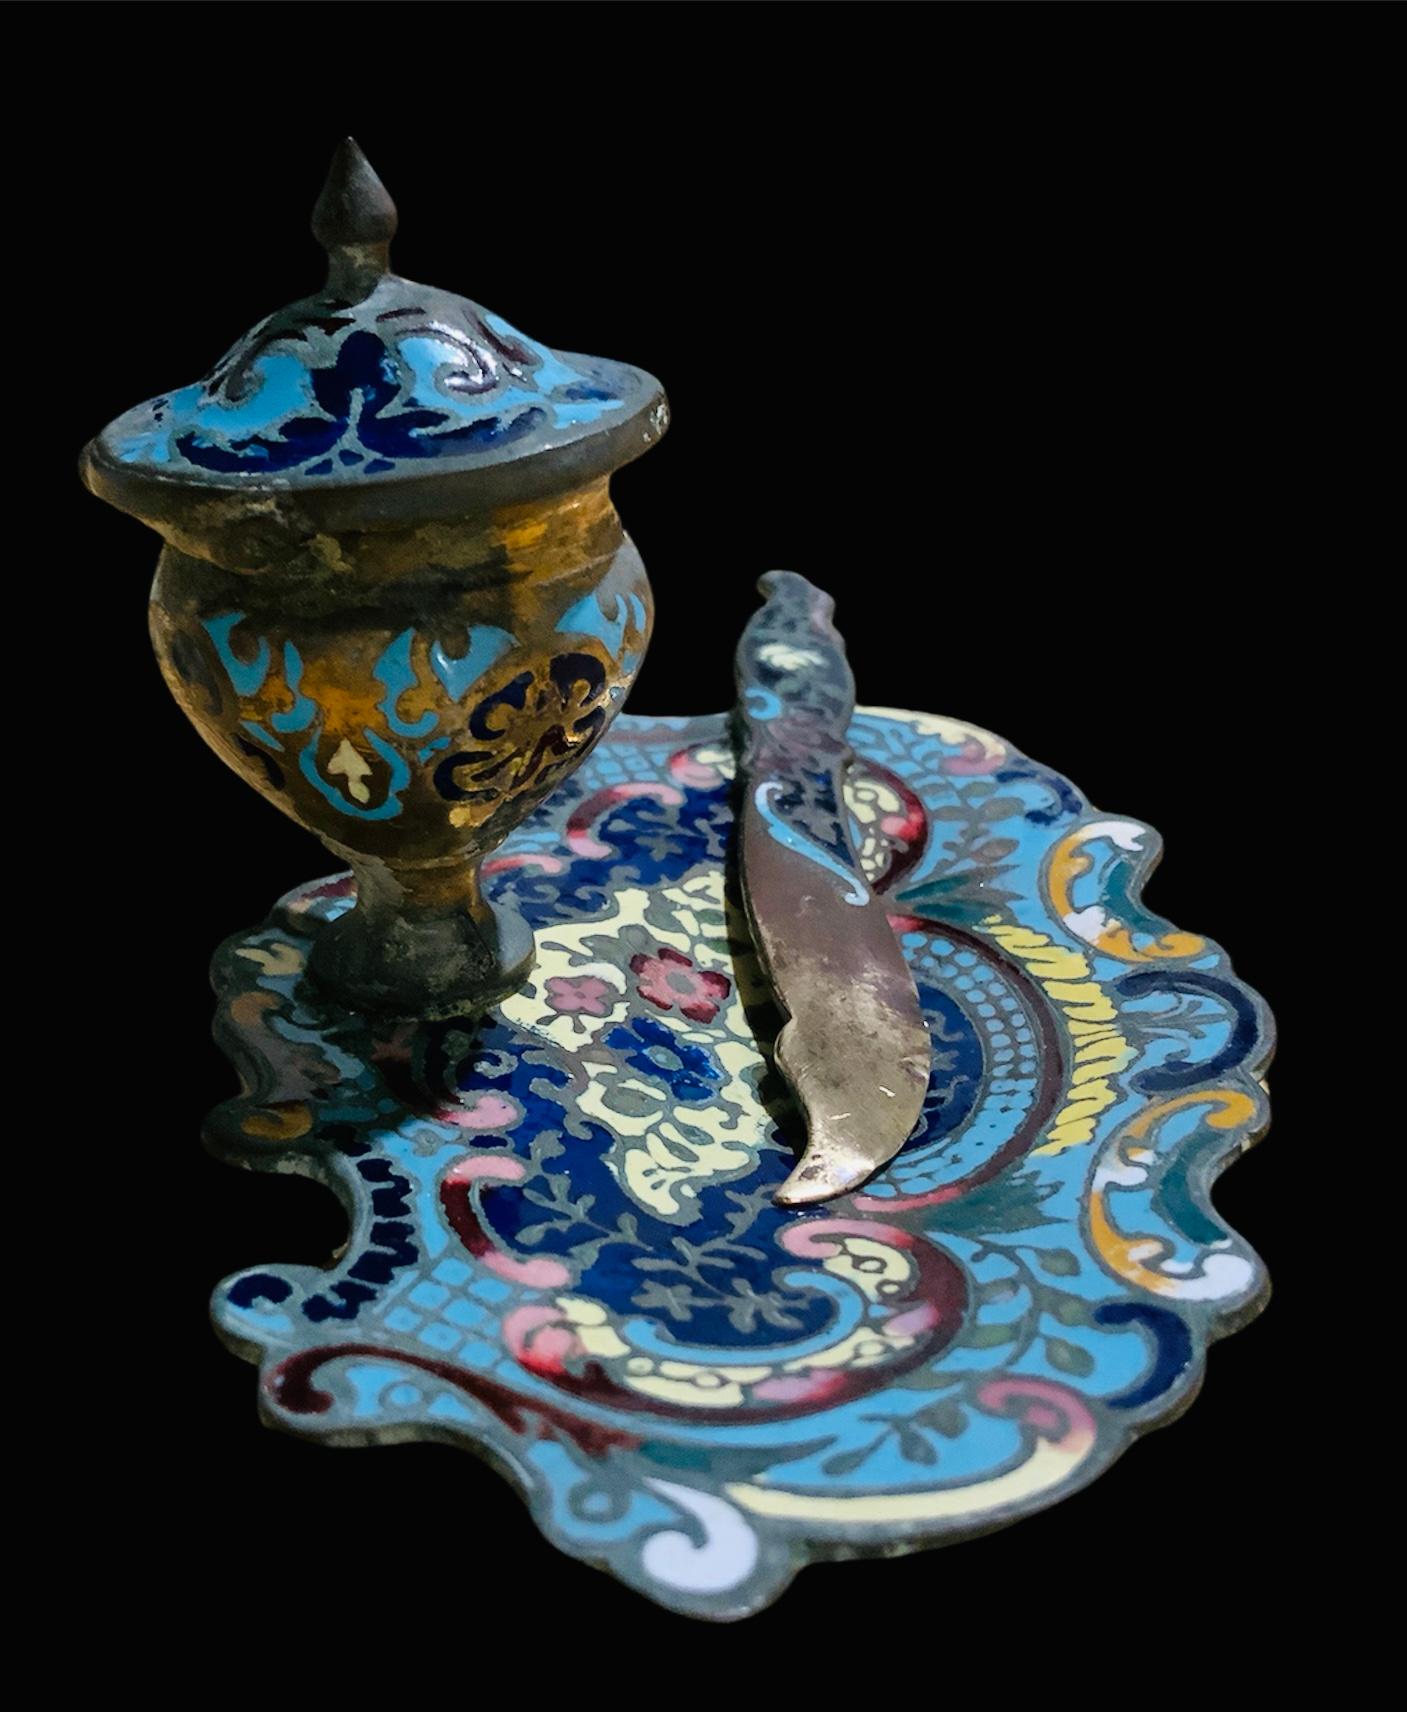 This is a small bronze champleve enamel set of an inkwell and letter opener. Both of them depicts colorful hand painted flowers, “C” scrolls and foliages. The resting plate of the inkwell depicts a serpentine border. The inkwell includes a small